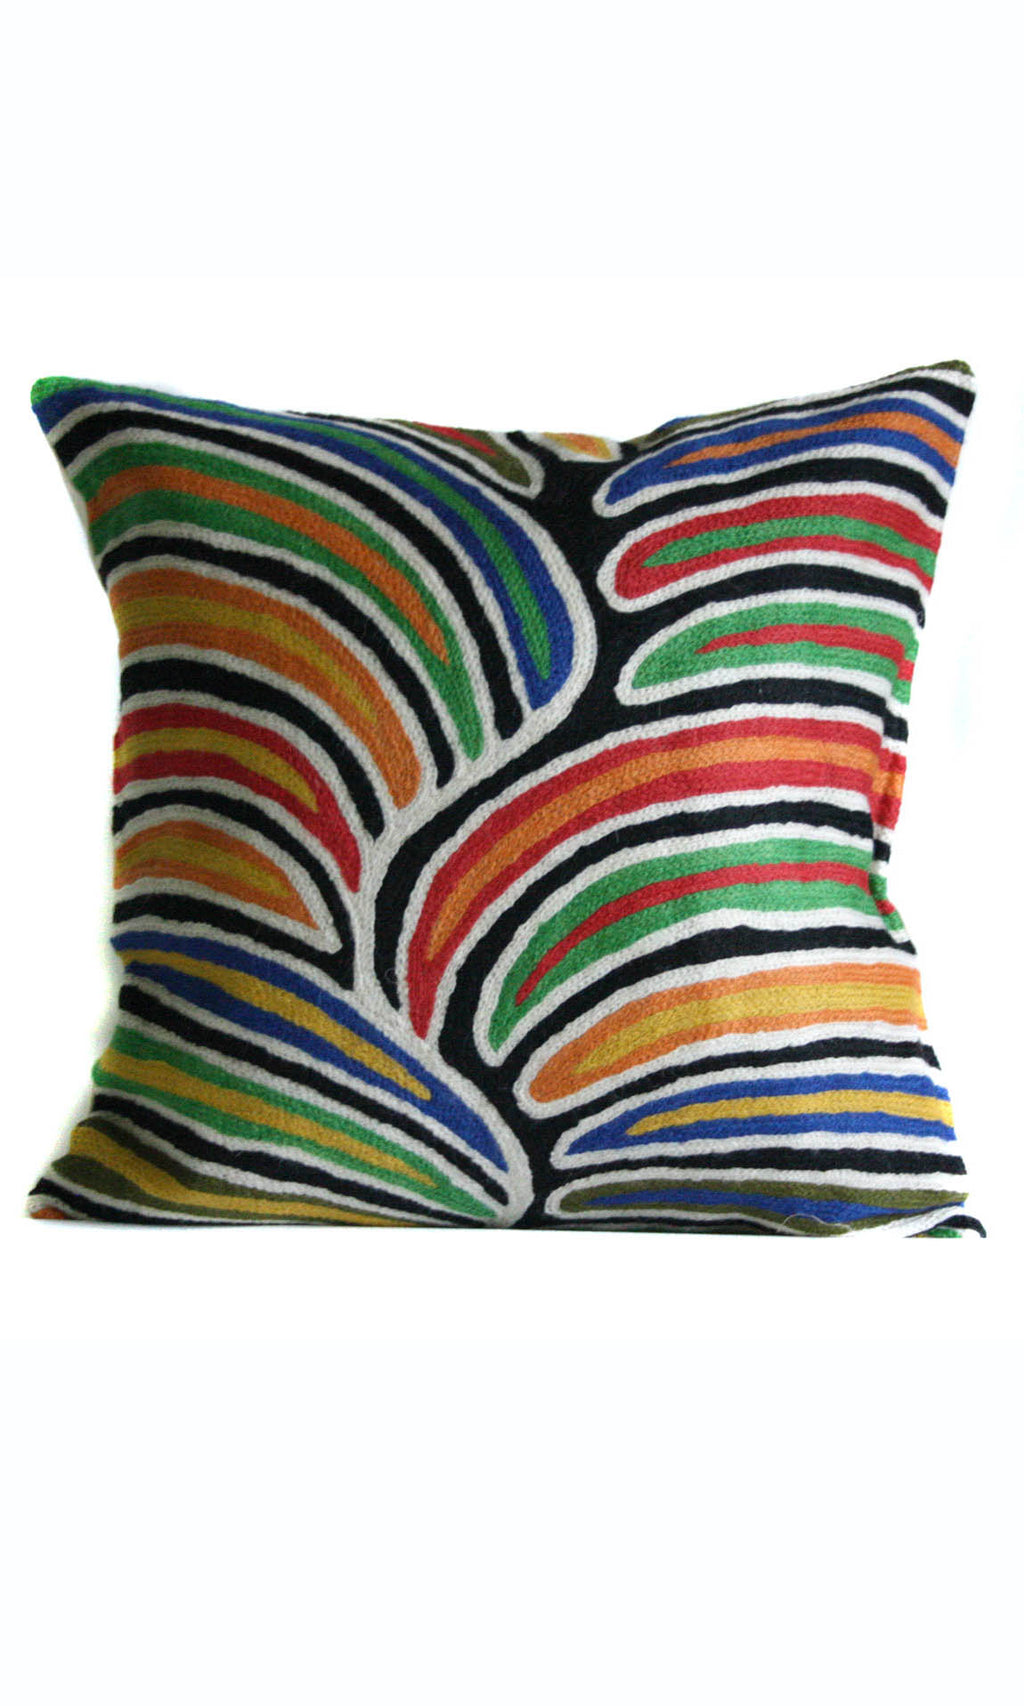 Aboriginal Art Cushion Cover by Betsy Lewis (2)